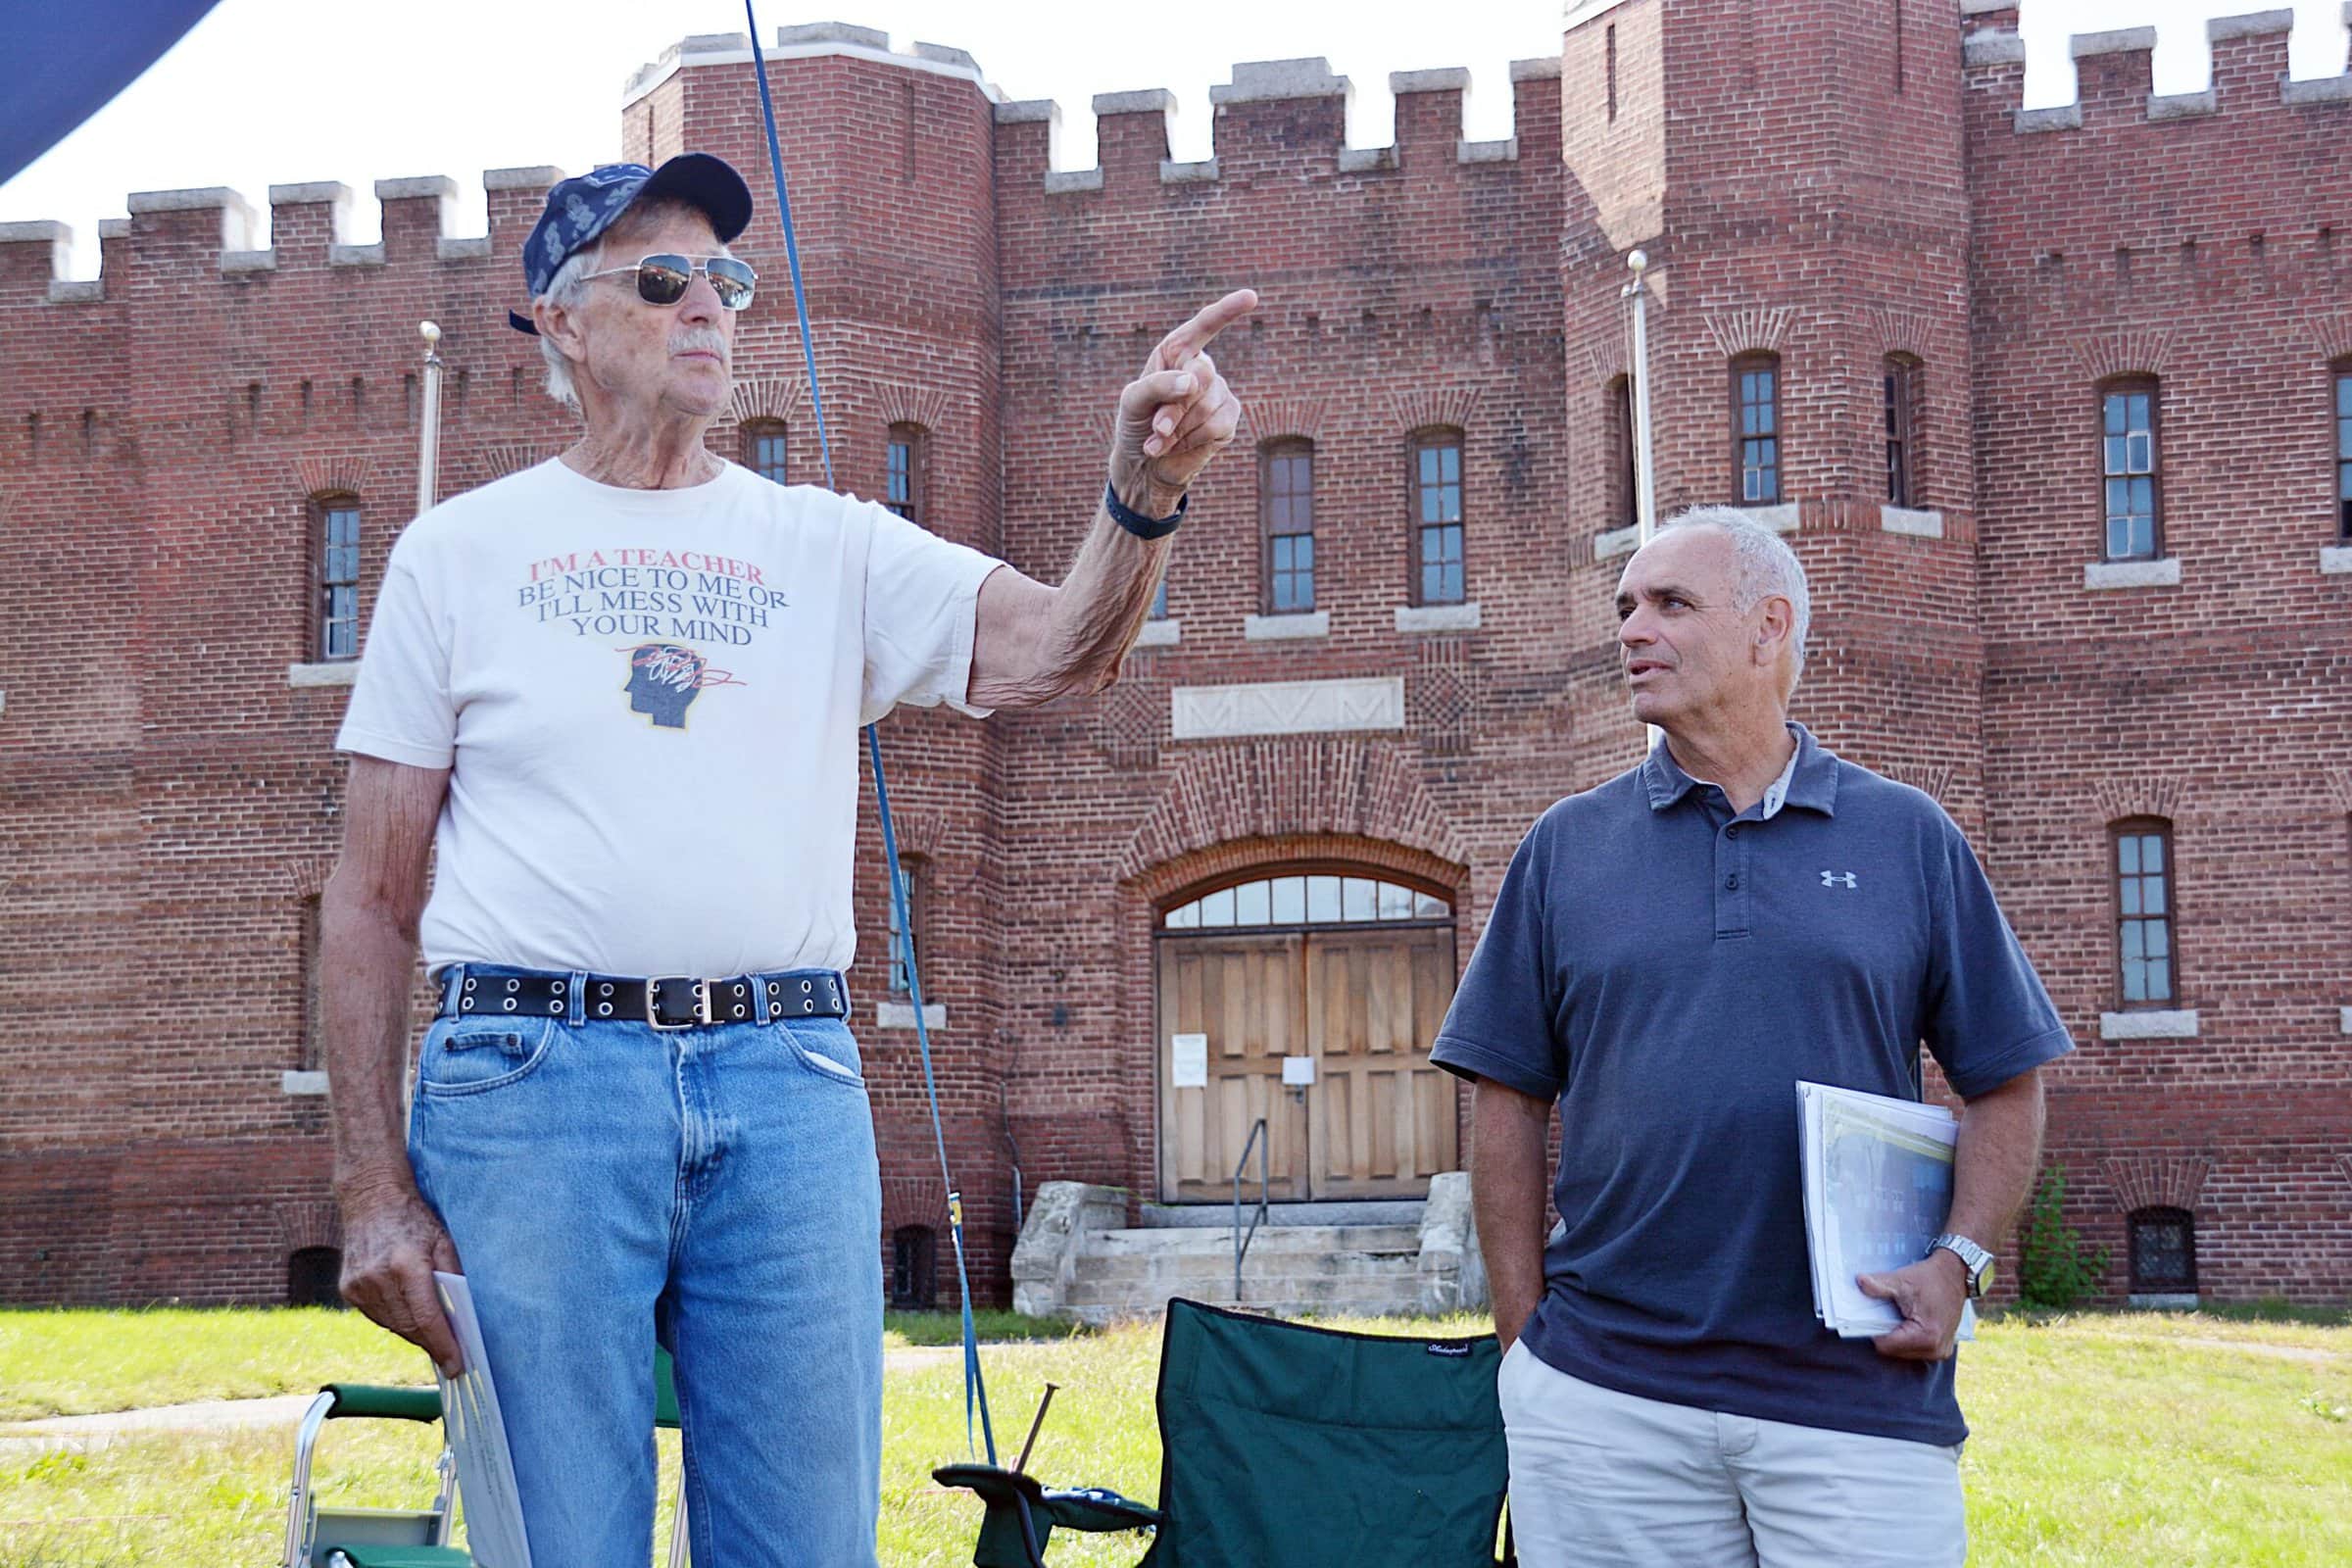 Celebrate Hudson festival benefits the Armory Project